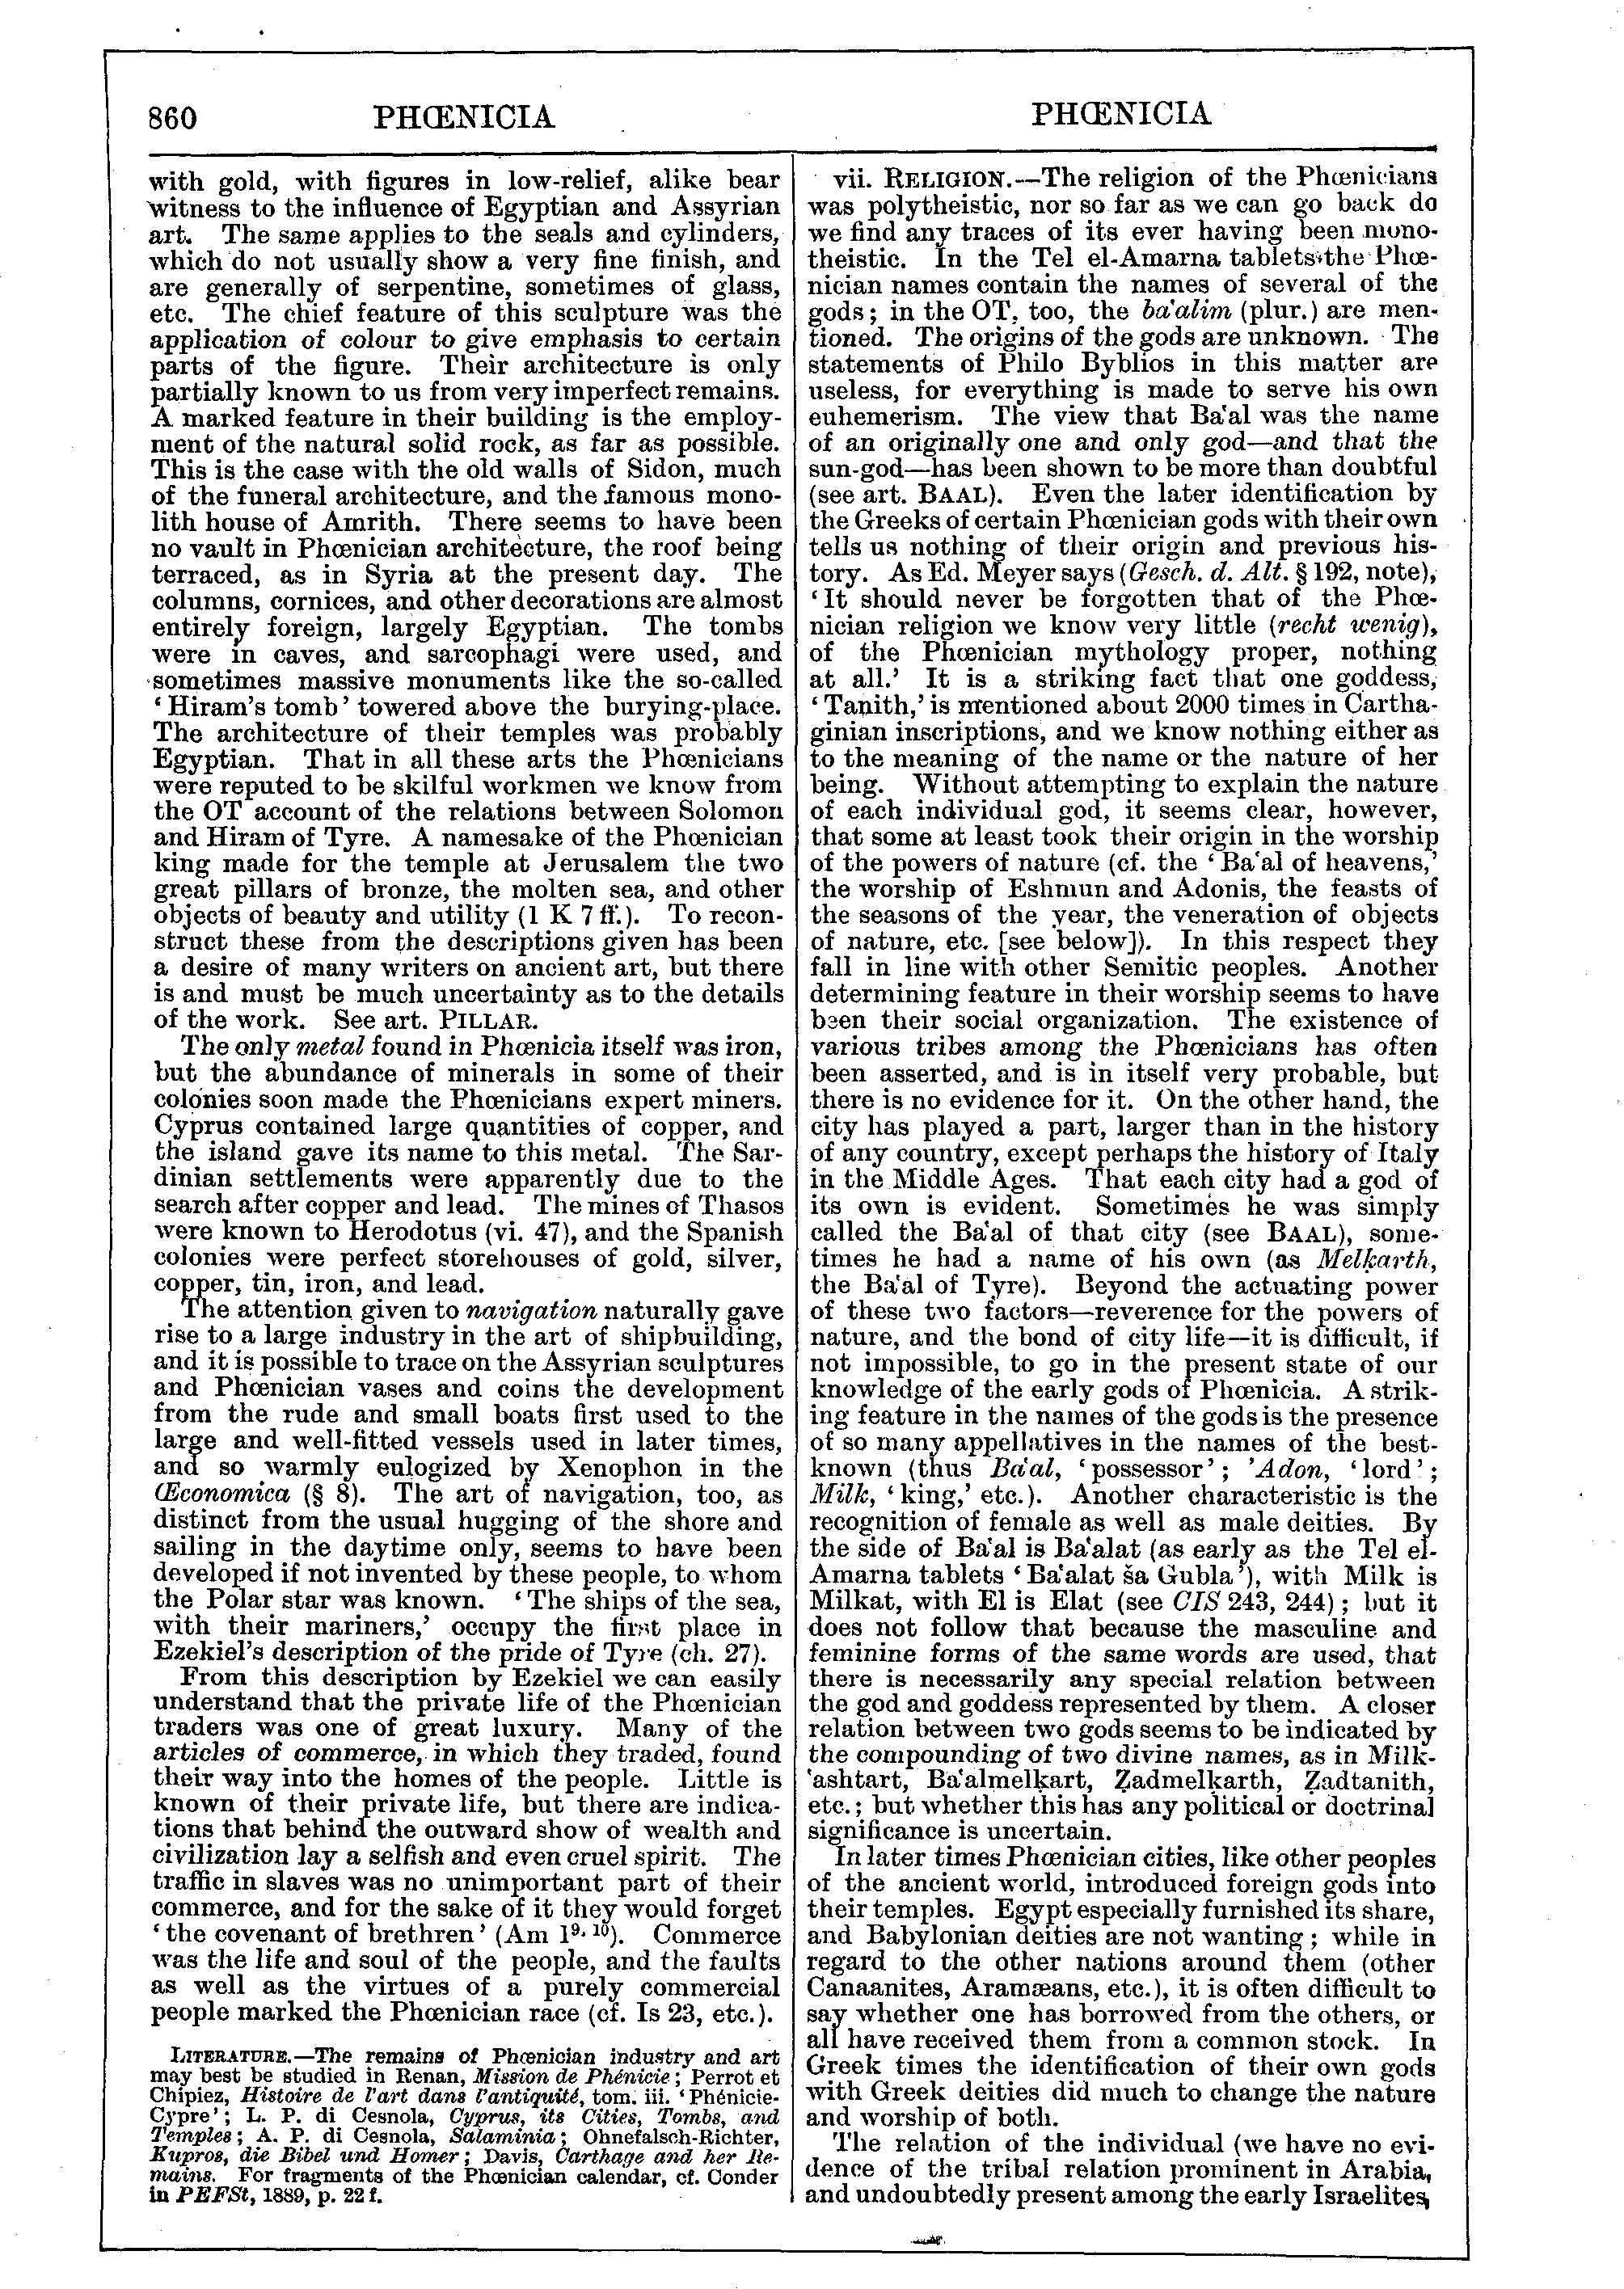 Image of page 860